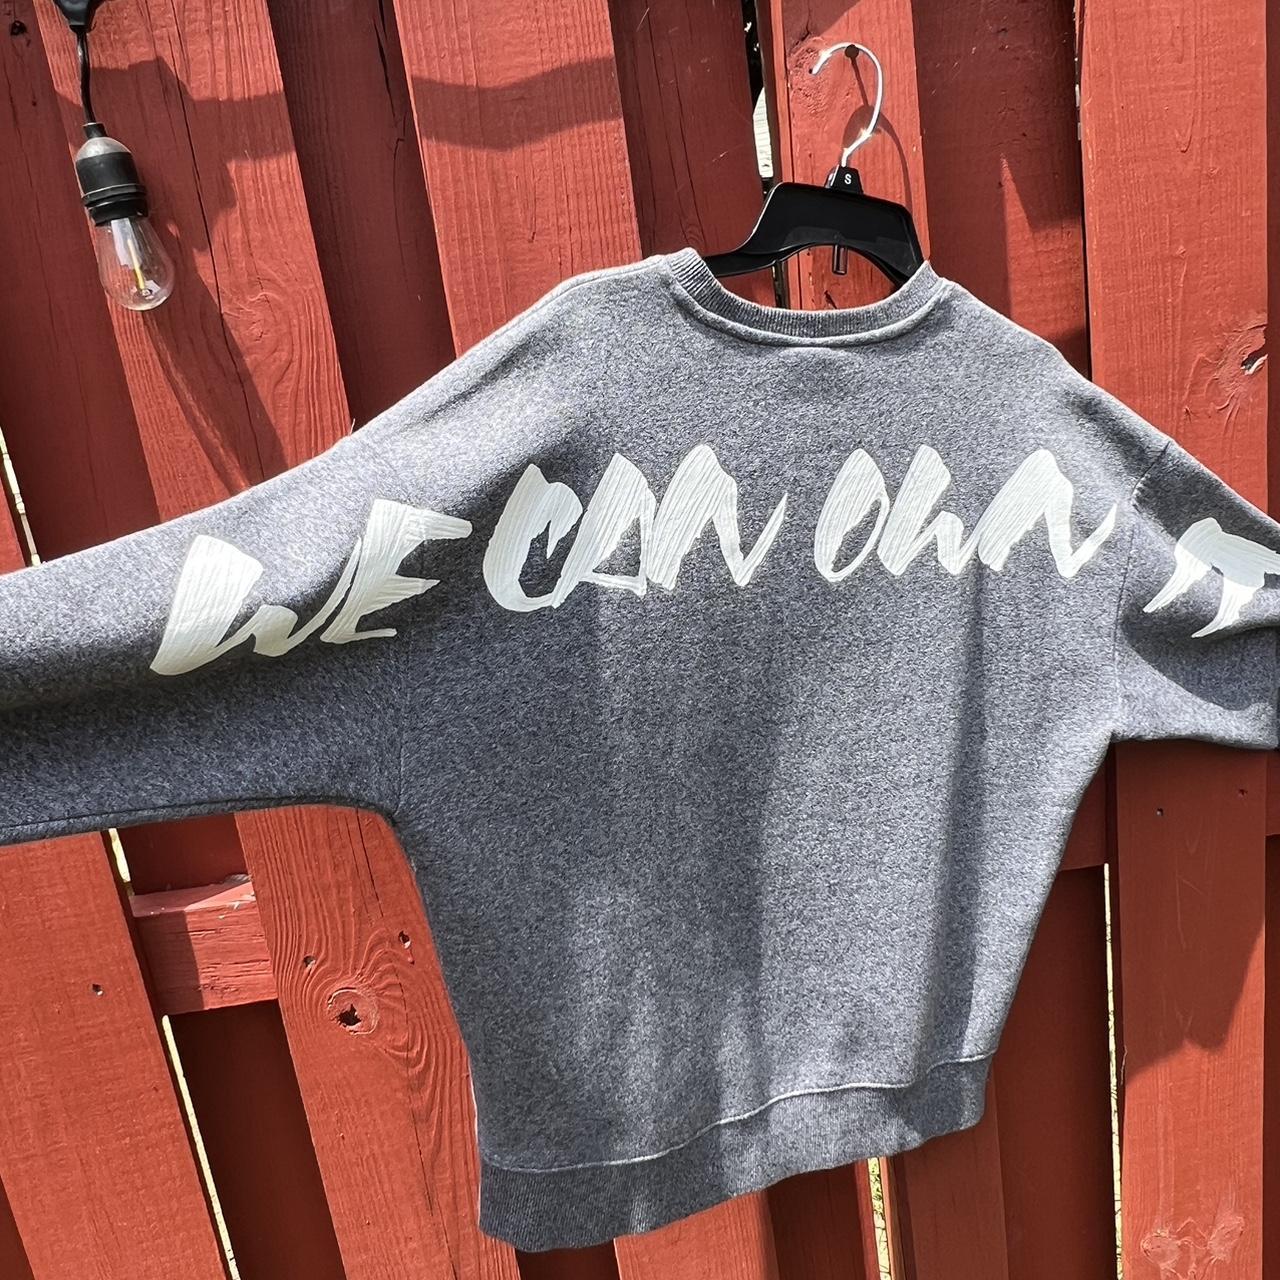 H&M x The Weeknd We Can Own It Hoodie Small 